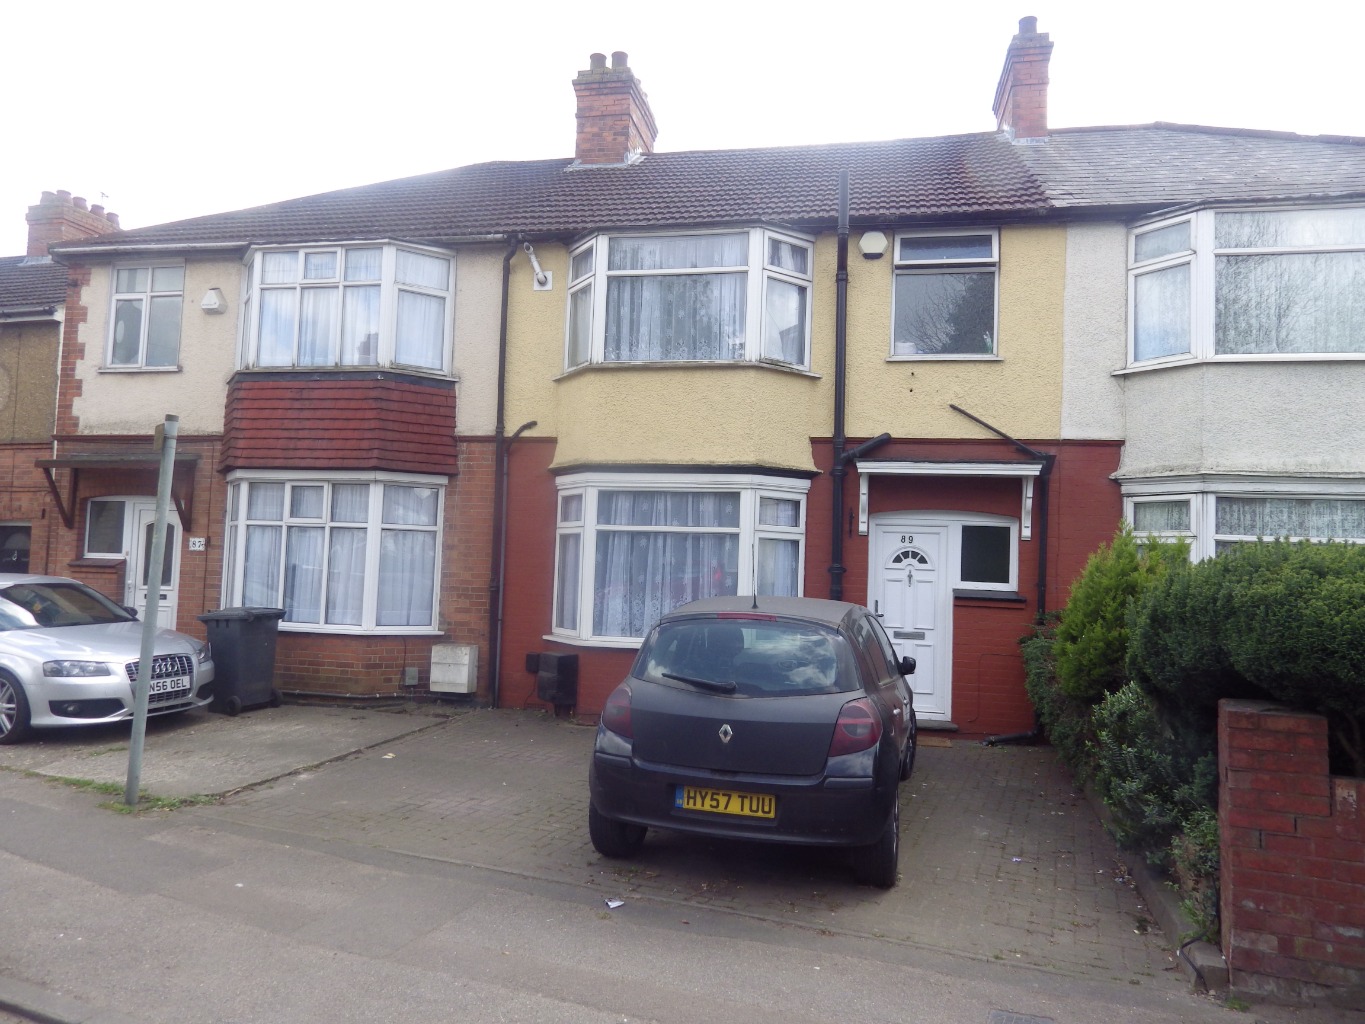 3 bed terraced house for sale in Stockingstone Road, Luton - Property Image 1